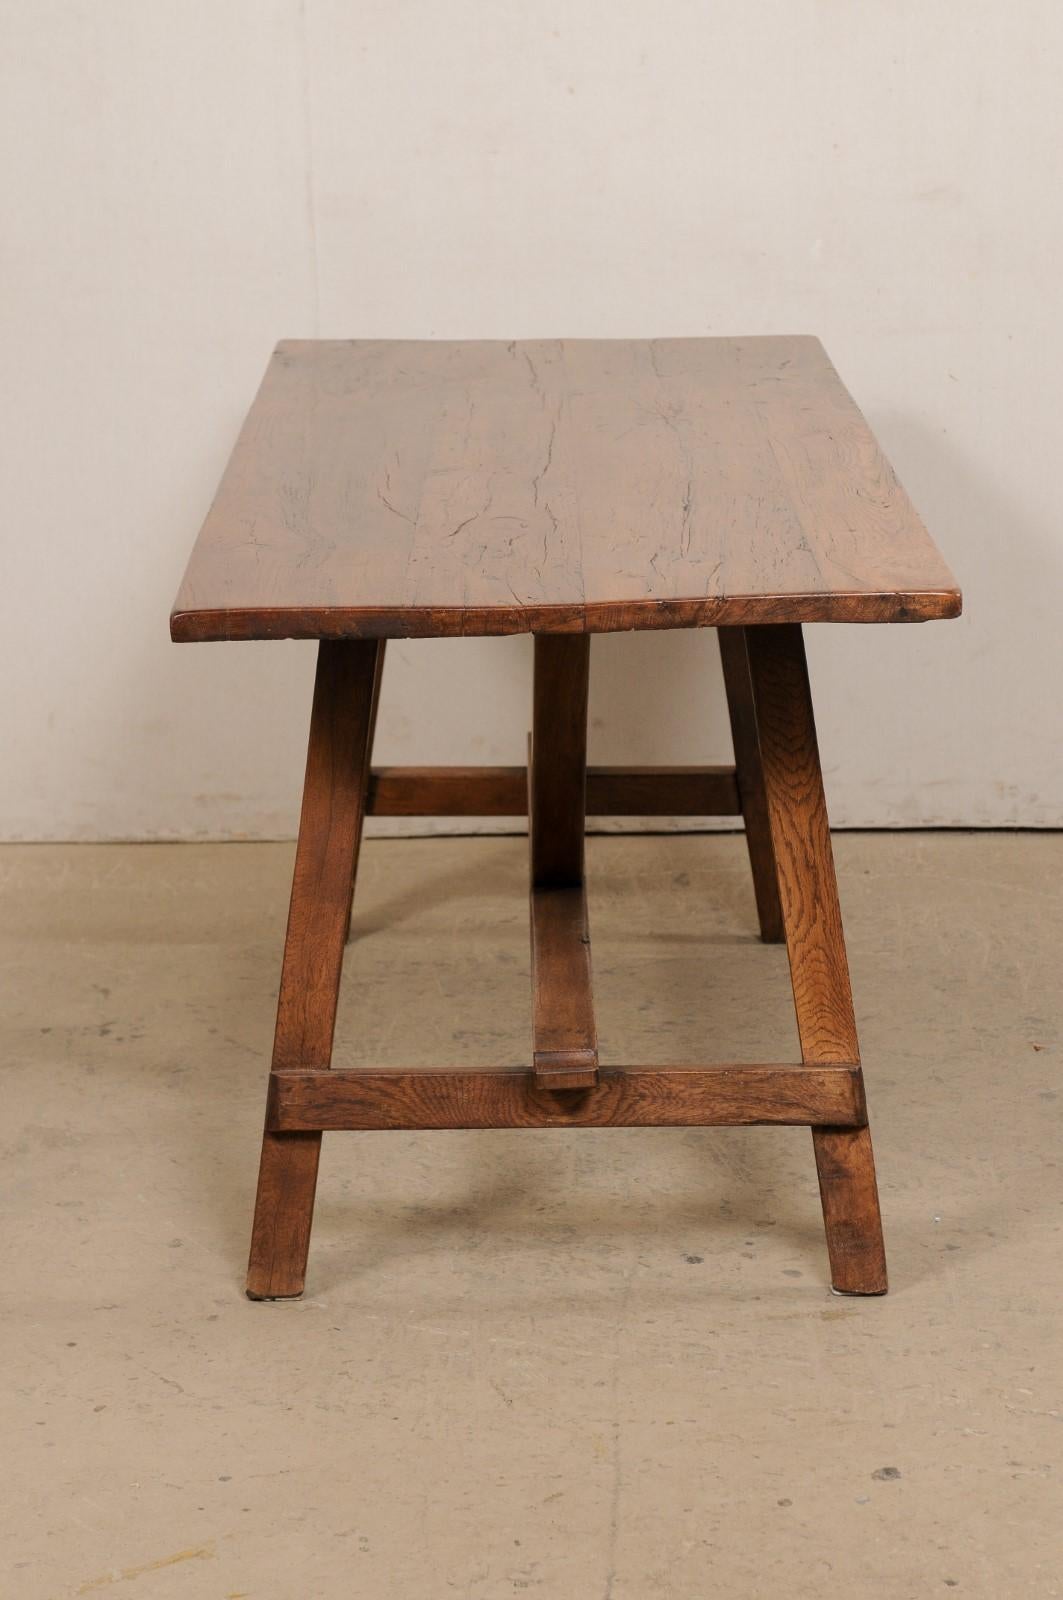 Early 18th C. Italian Walnut Table with V-Stretcher, a Great Desk Option 1